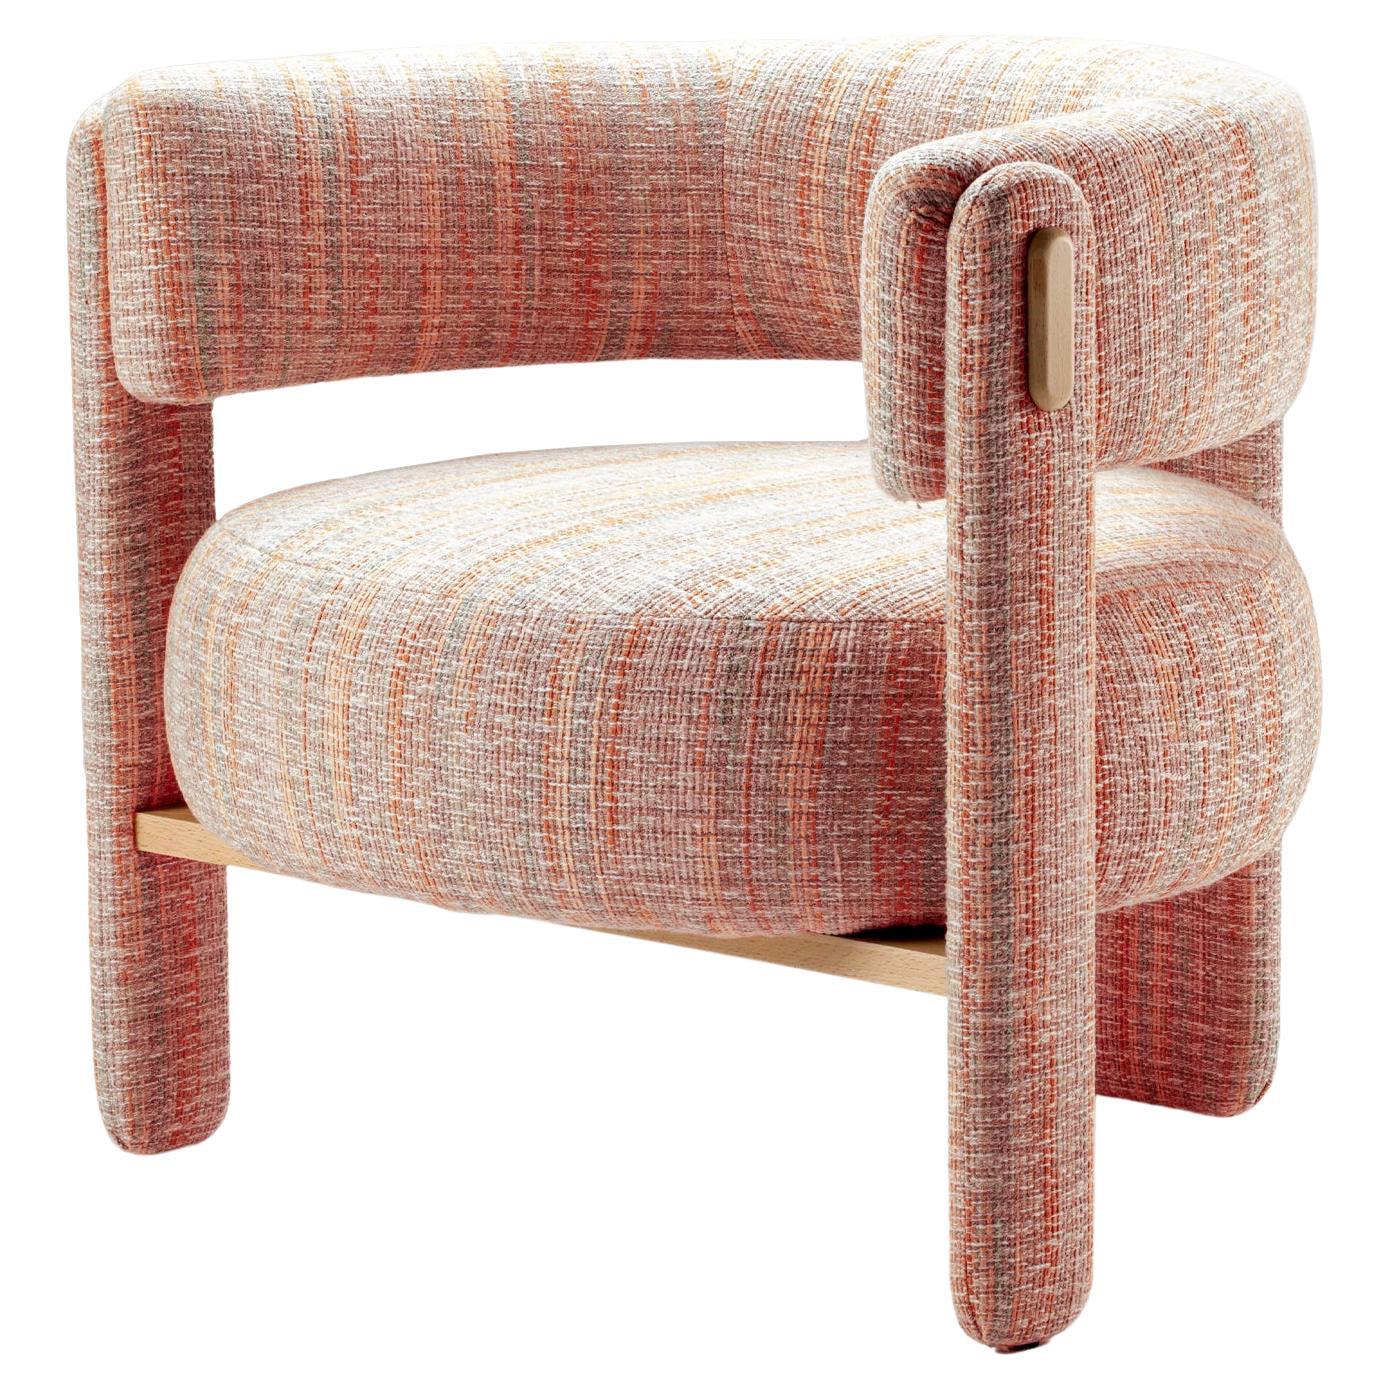 Choux Armchair with Bayes Sunset Fabric and Natural Wood applications